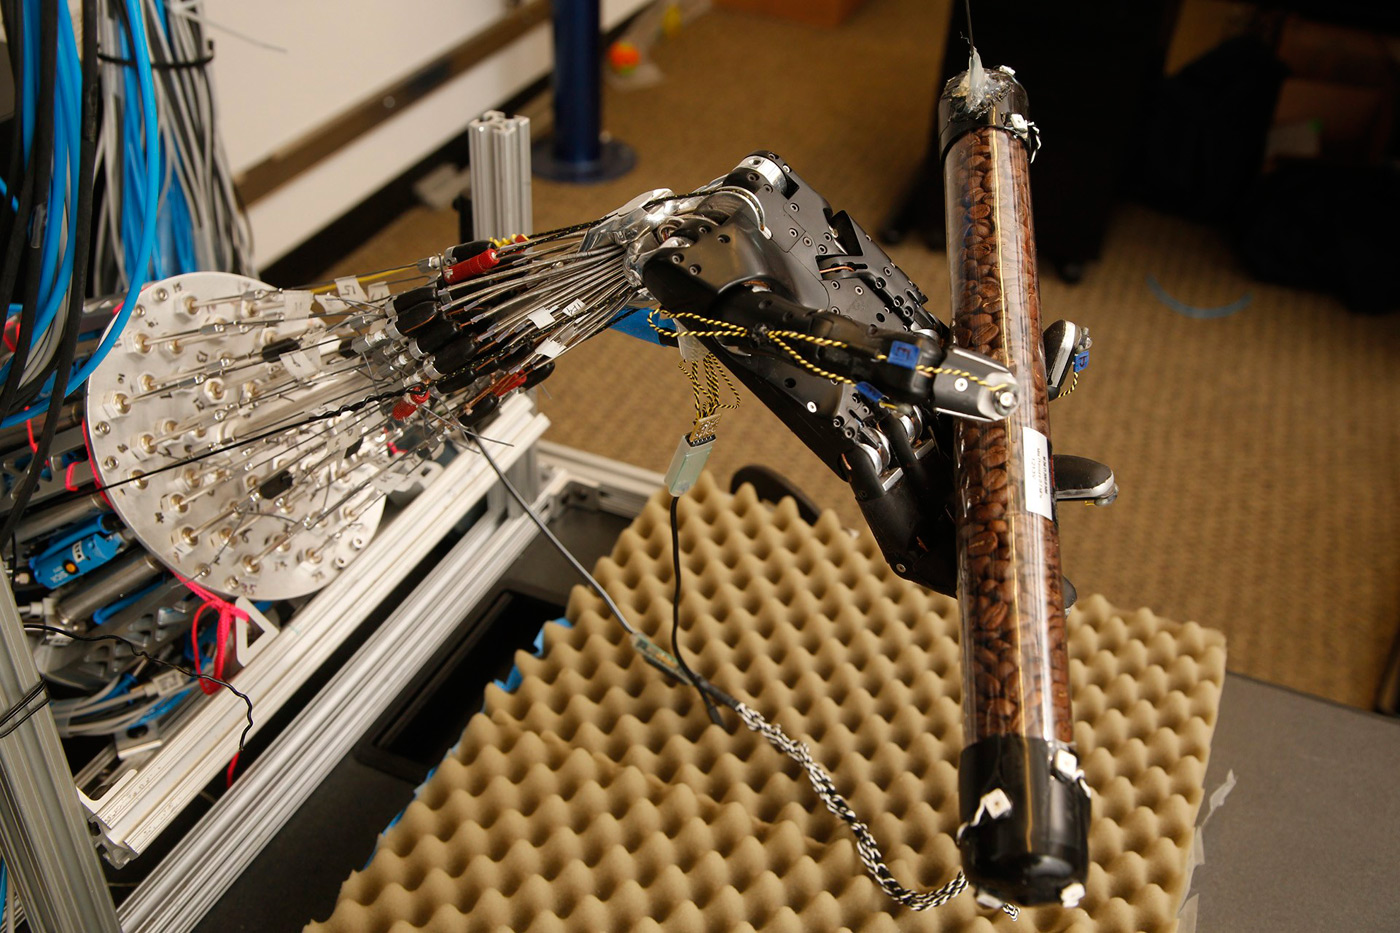 Robot hand learns to twirl objects on its own